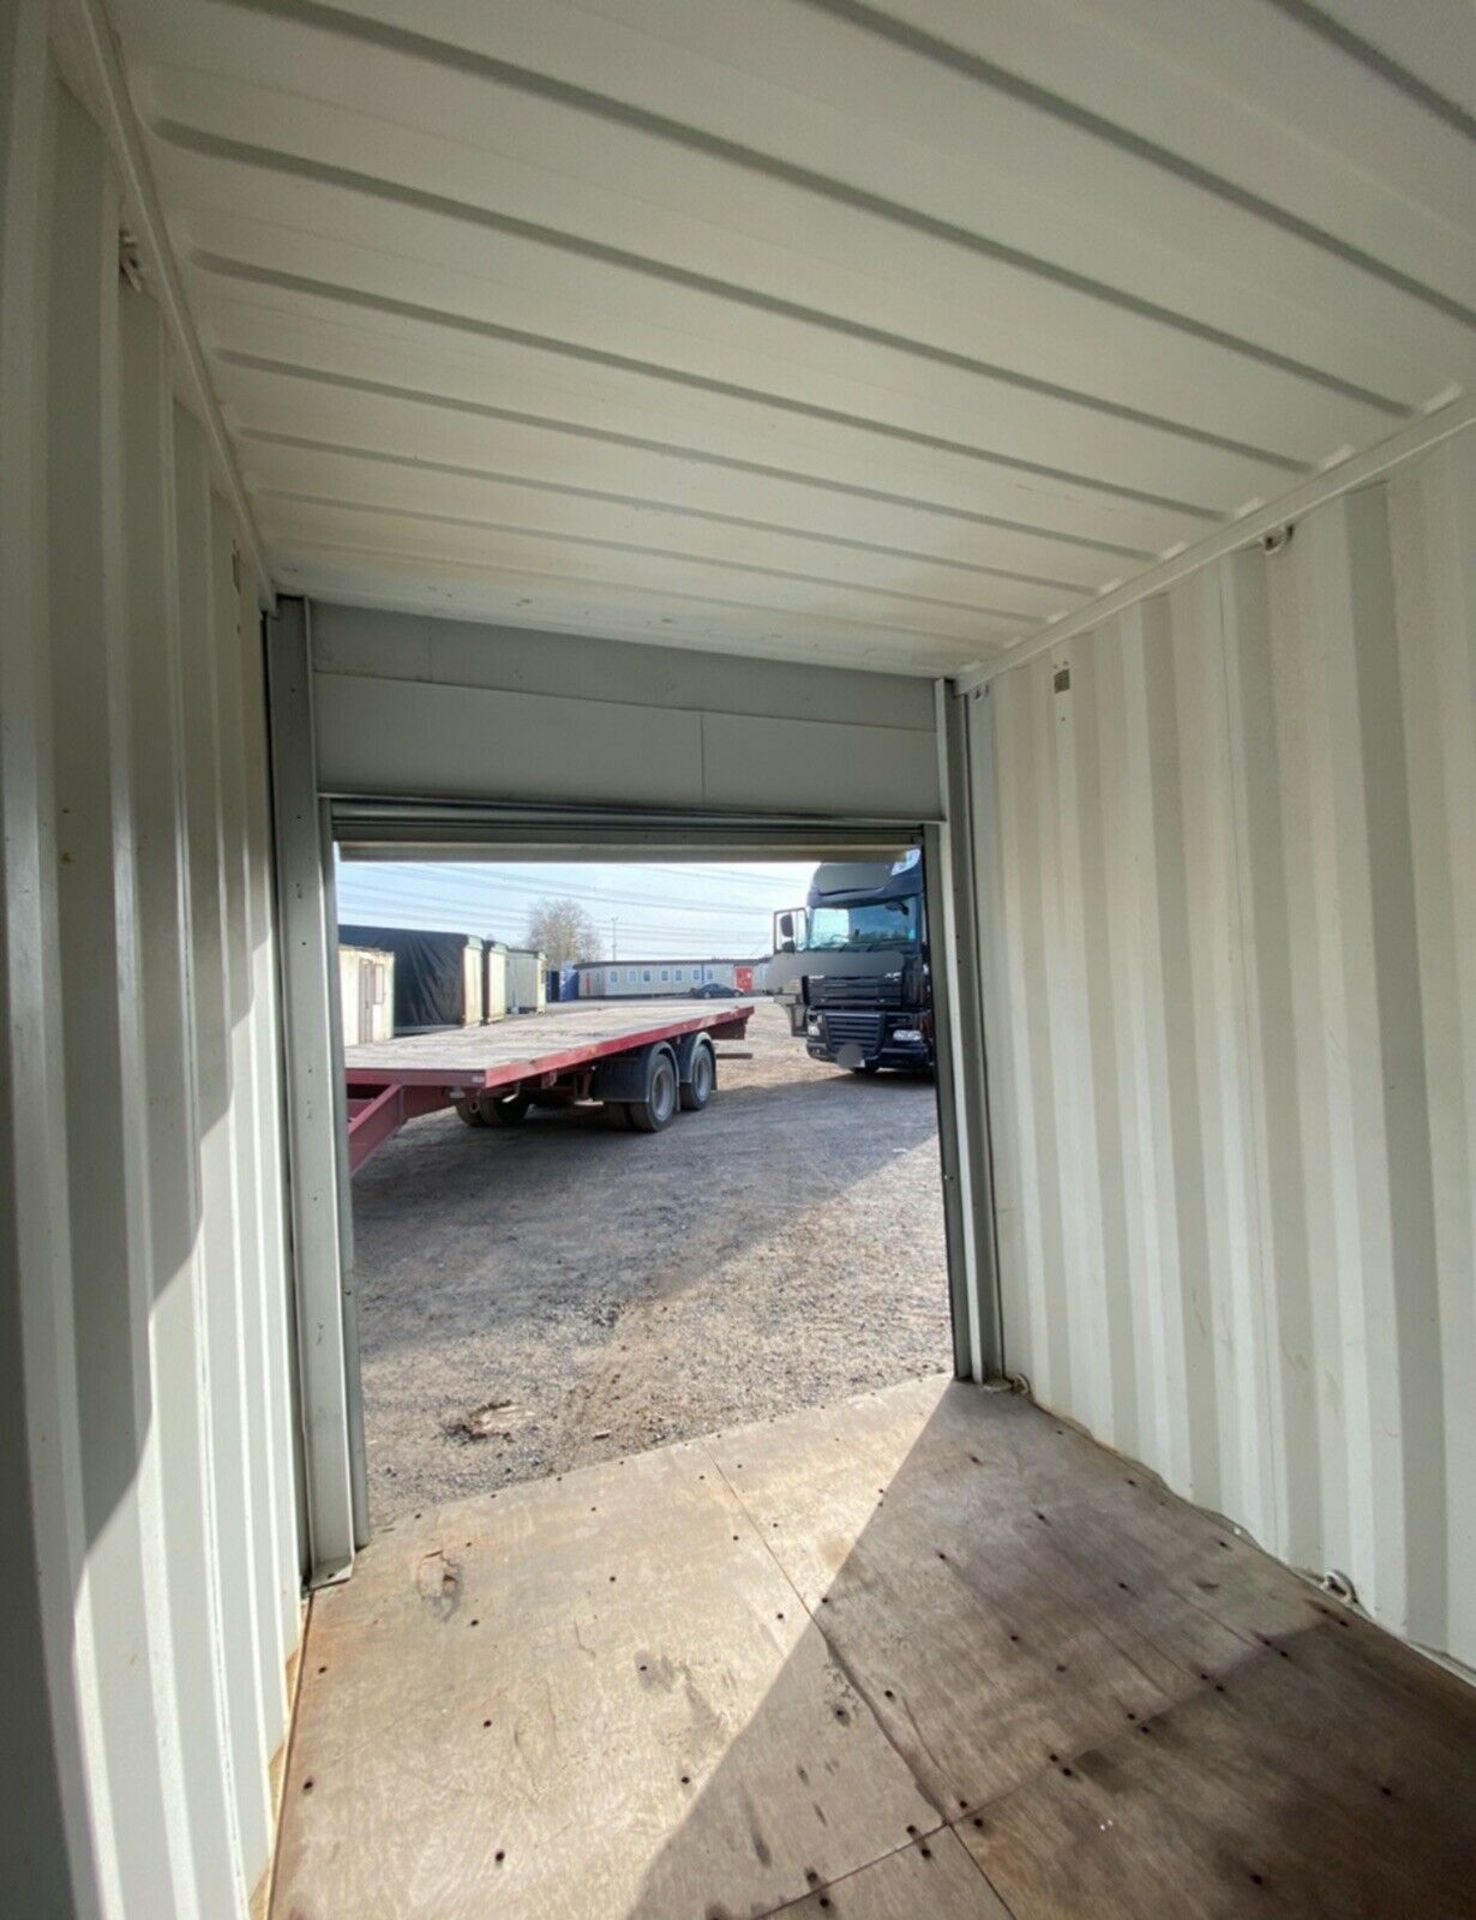 10ft High Cube Storage Container With Roller Shutt - Image 6 of 10